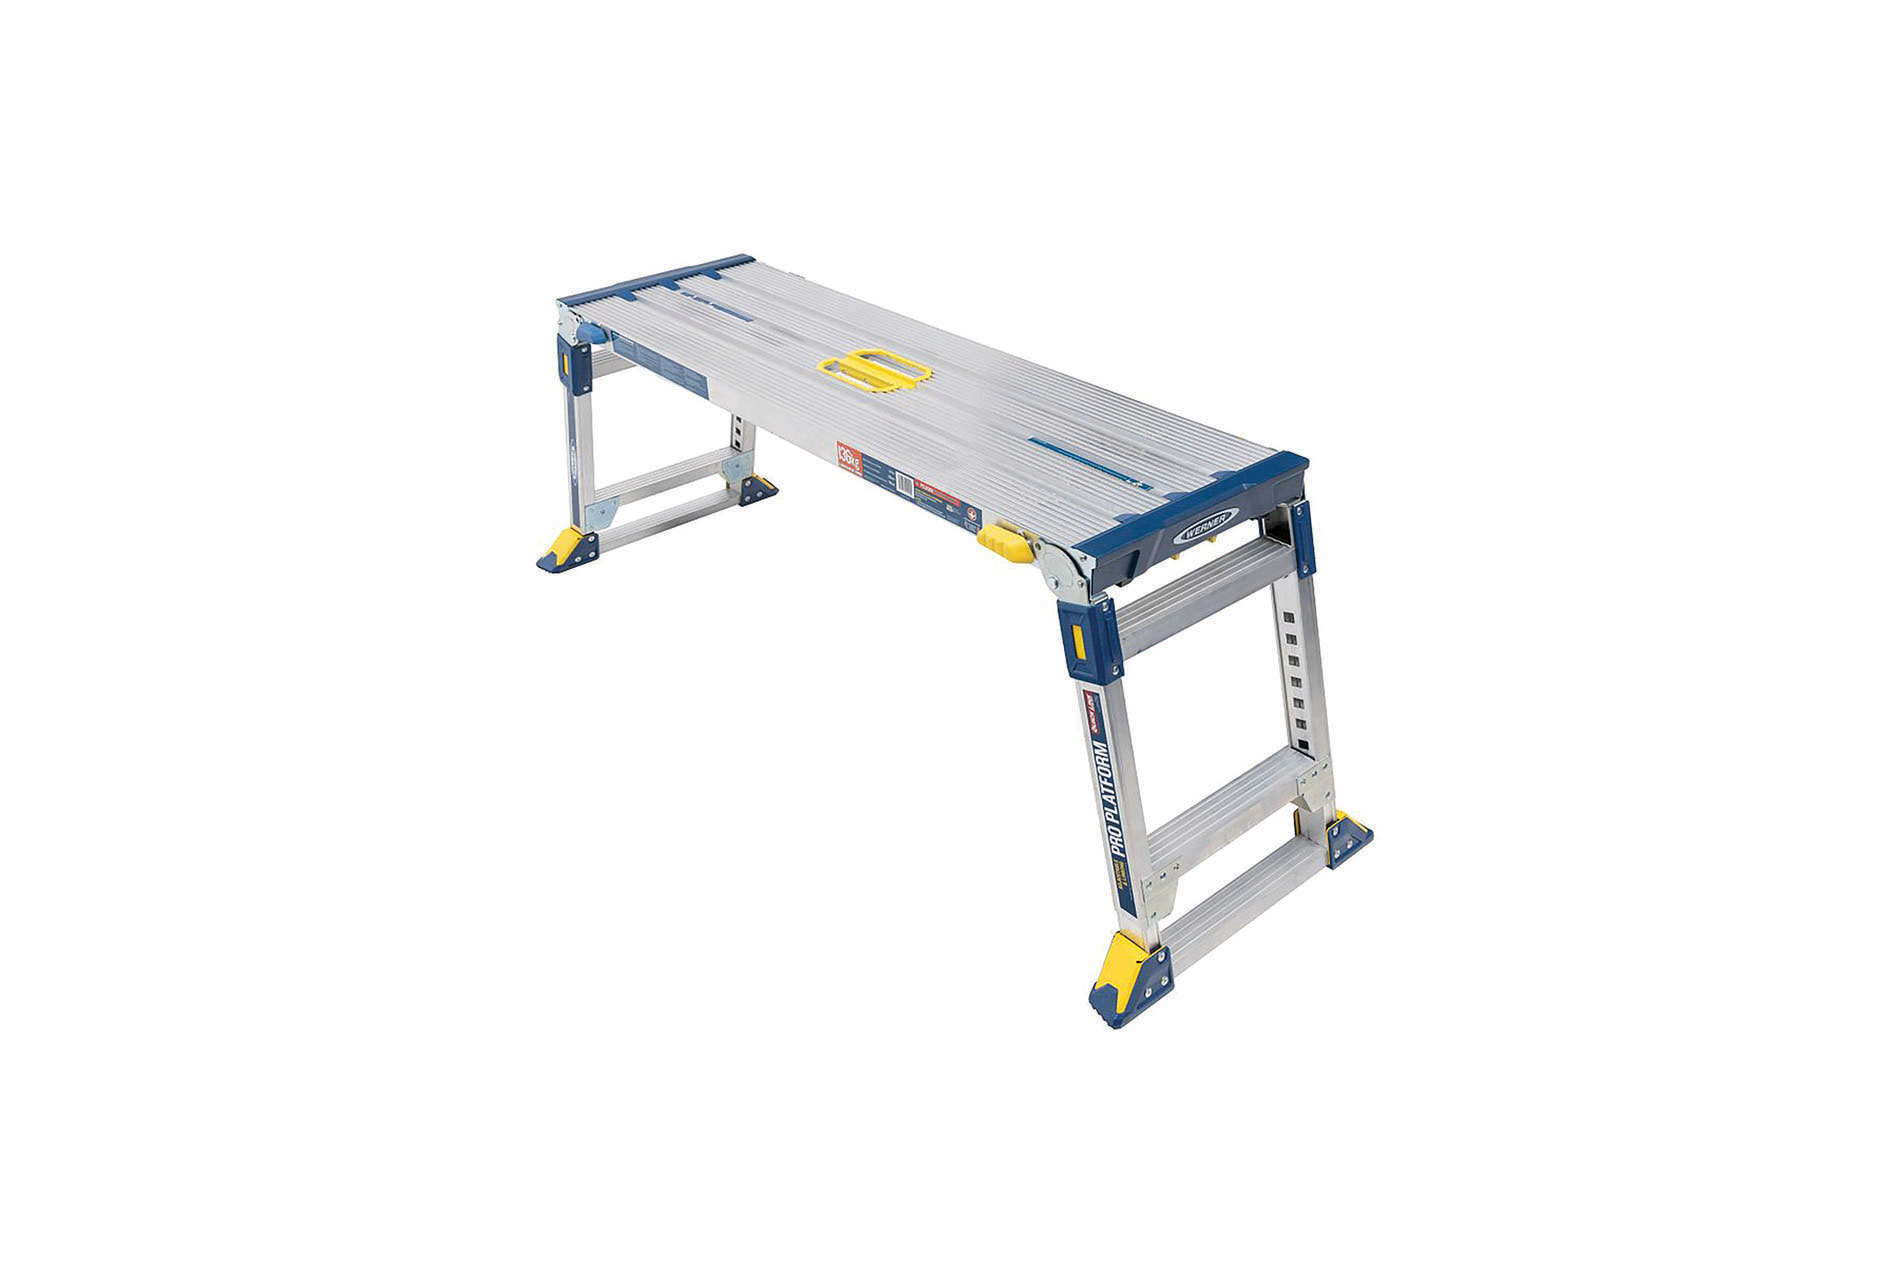 Blue, silver, and yellow work platform. Image by Werner.